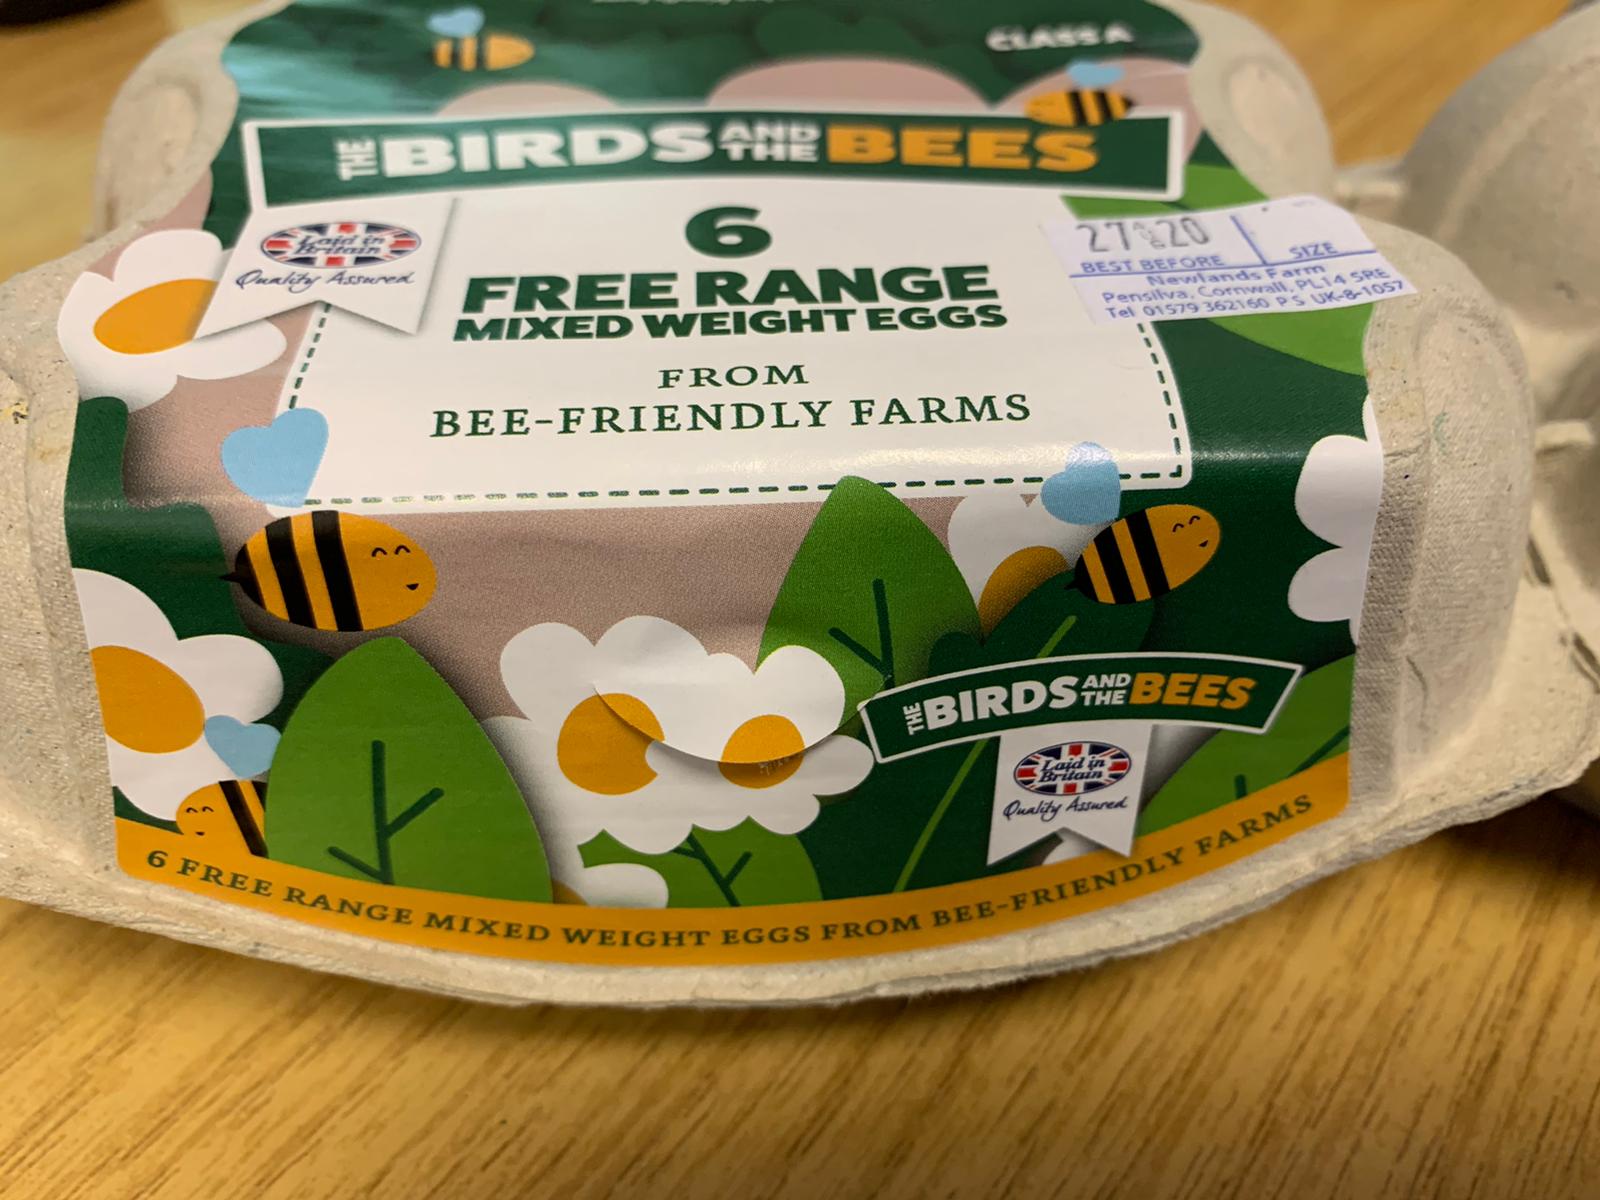 Eggs: The Birds And The Bees Free Range (subscription)